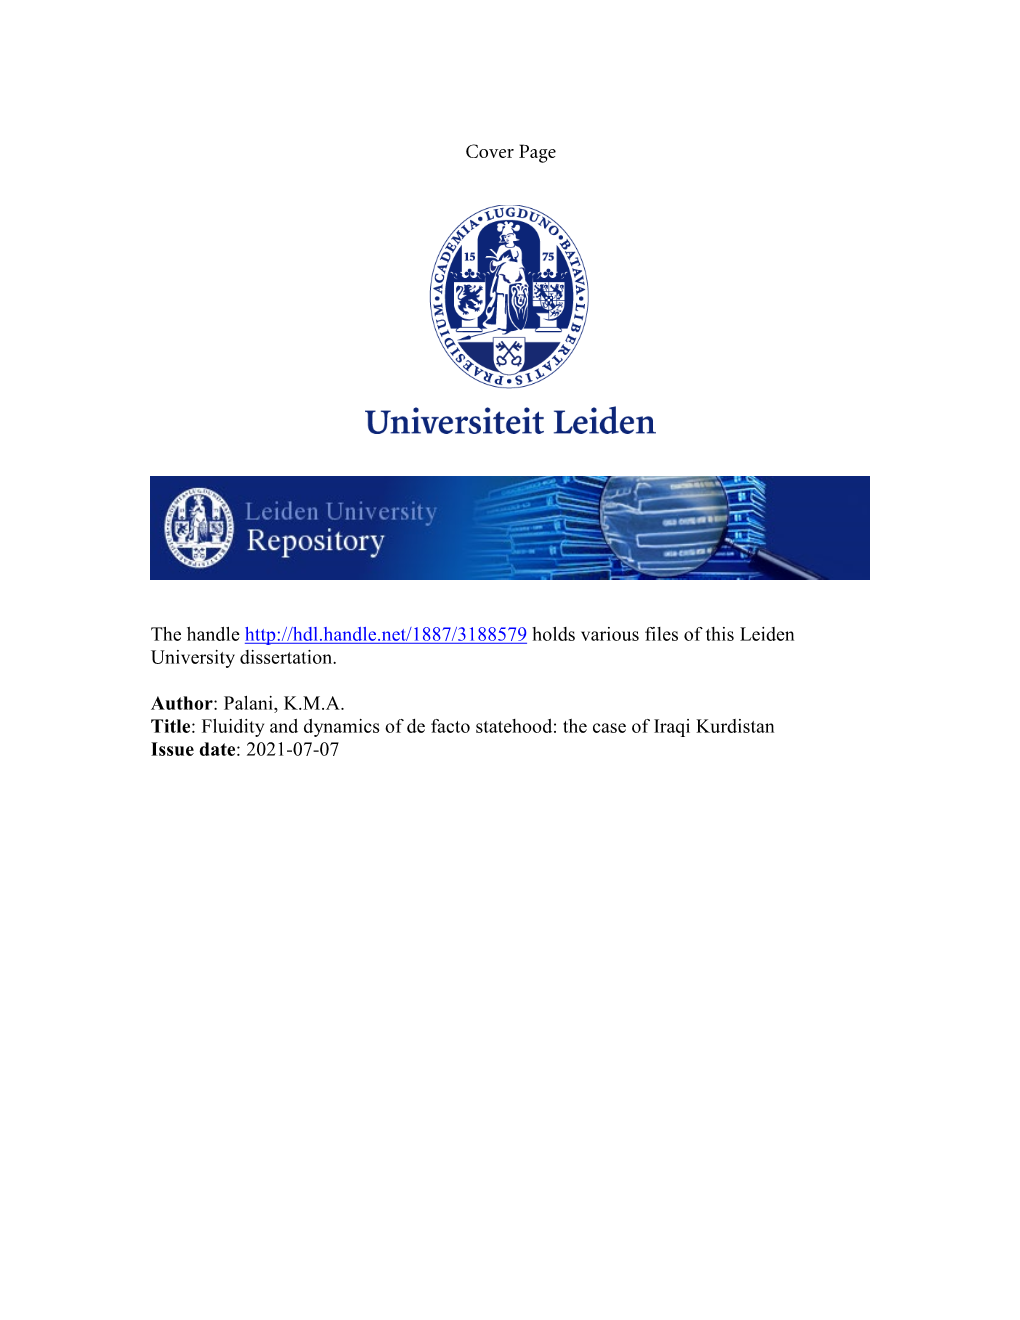 Cover Page the Handle Holds Various Files of This Leiden University Dissertation. Author